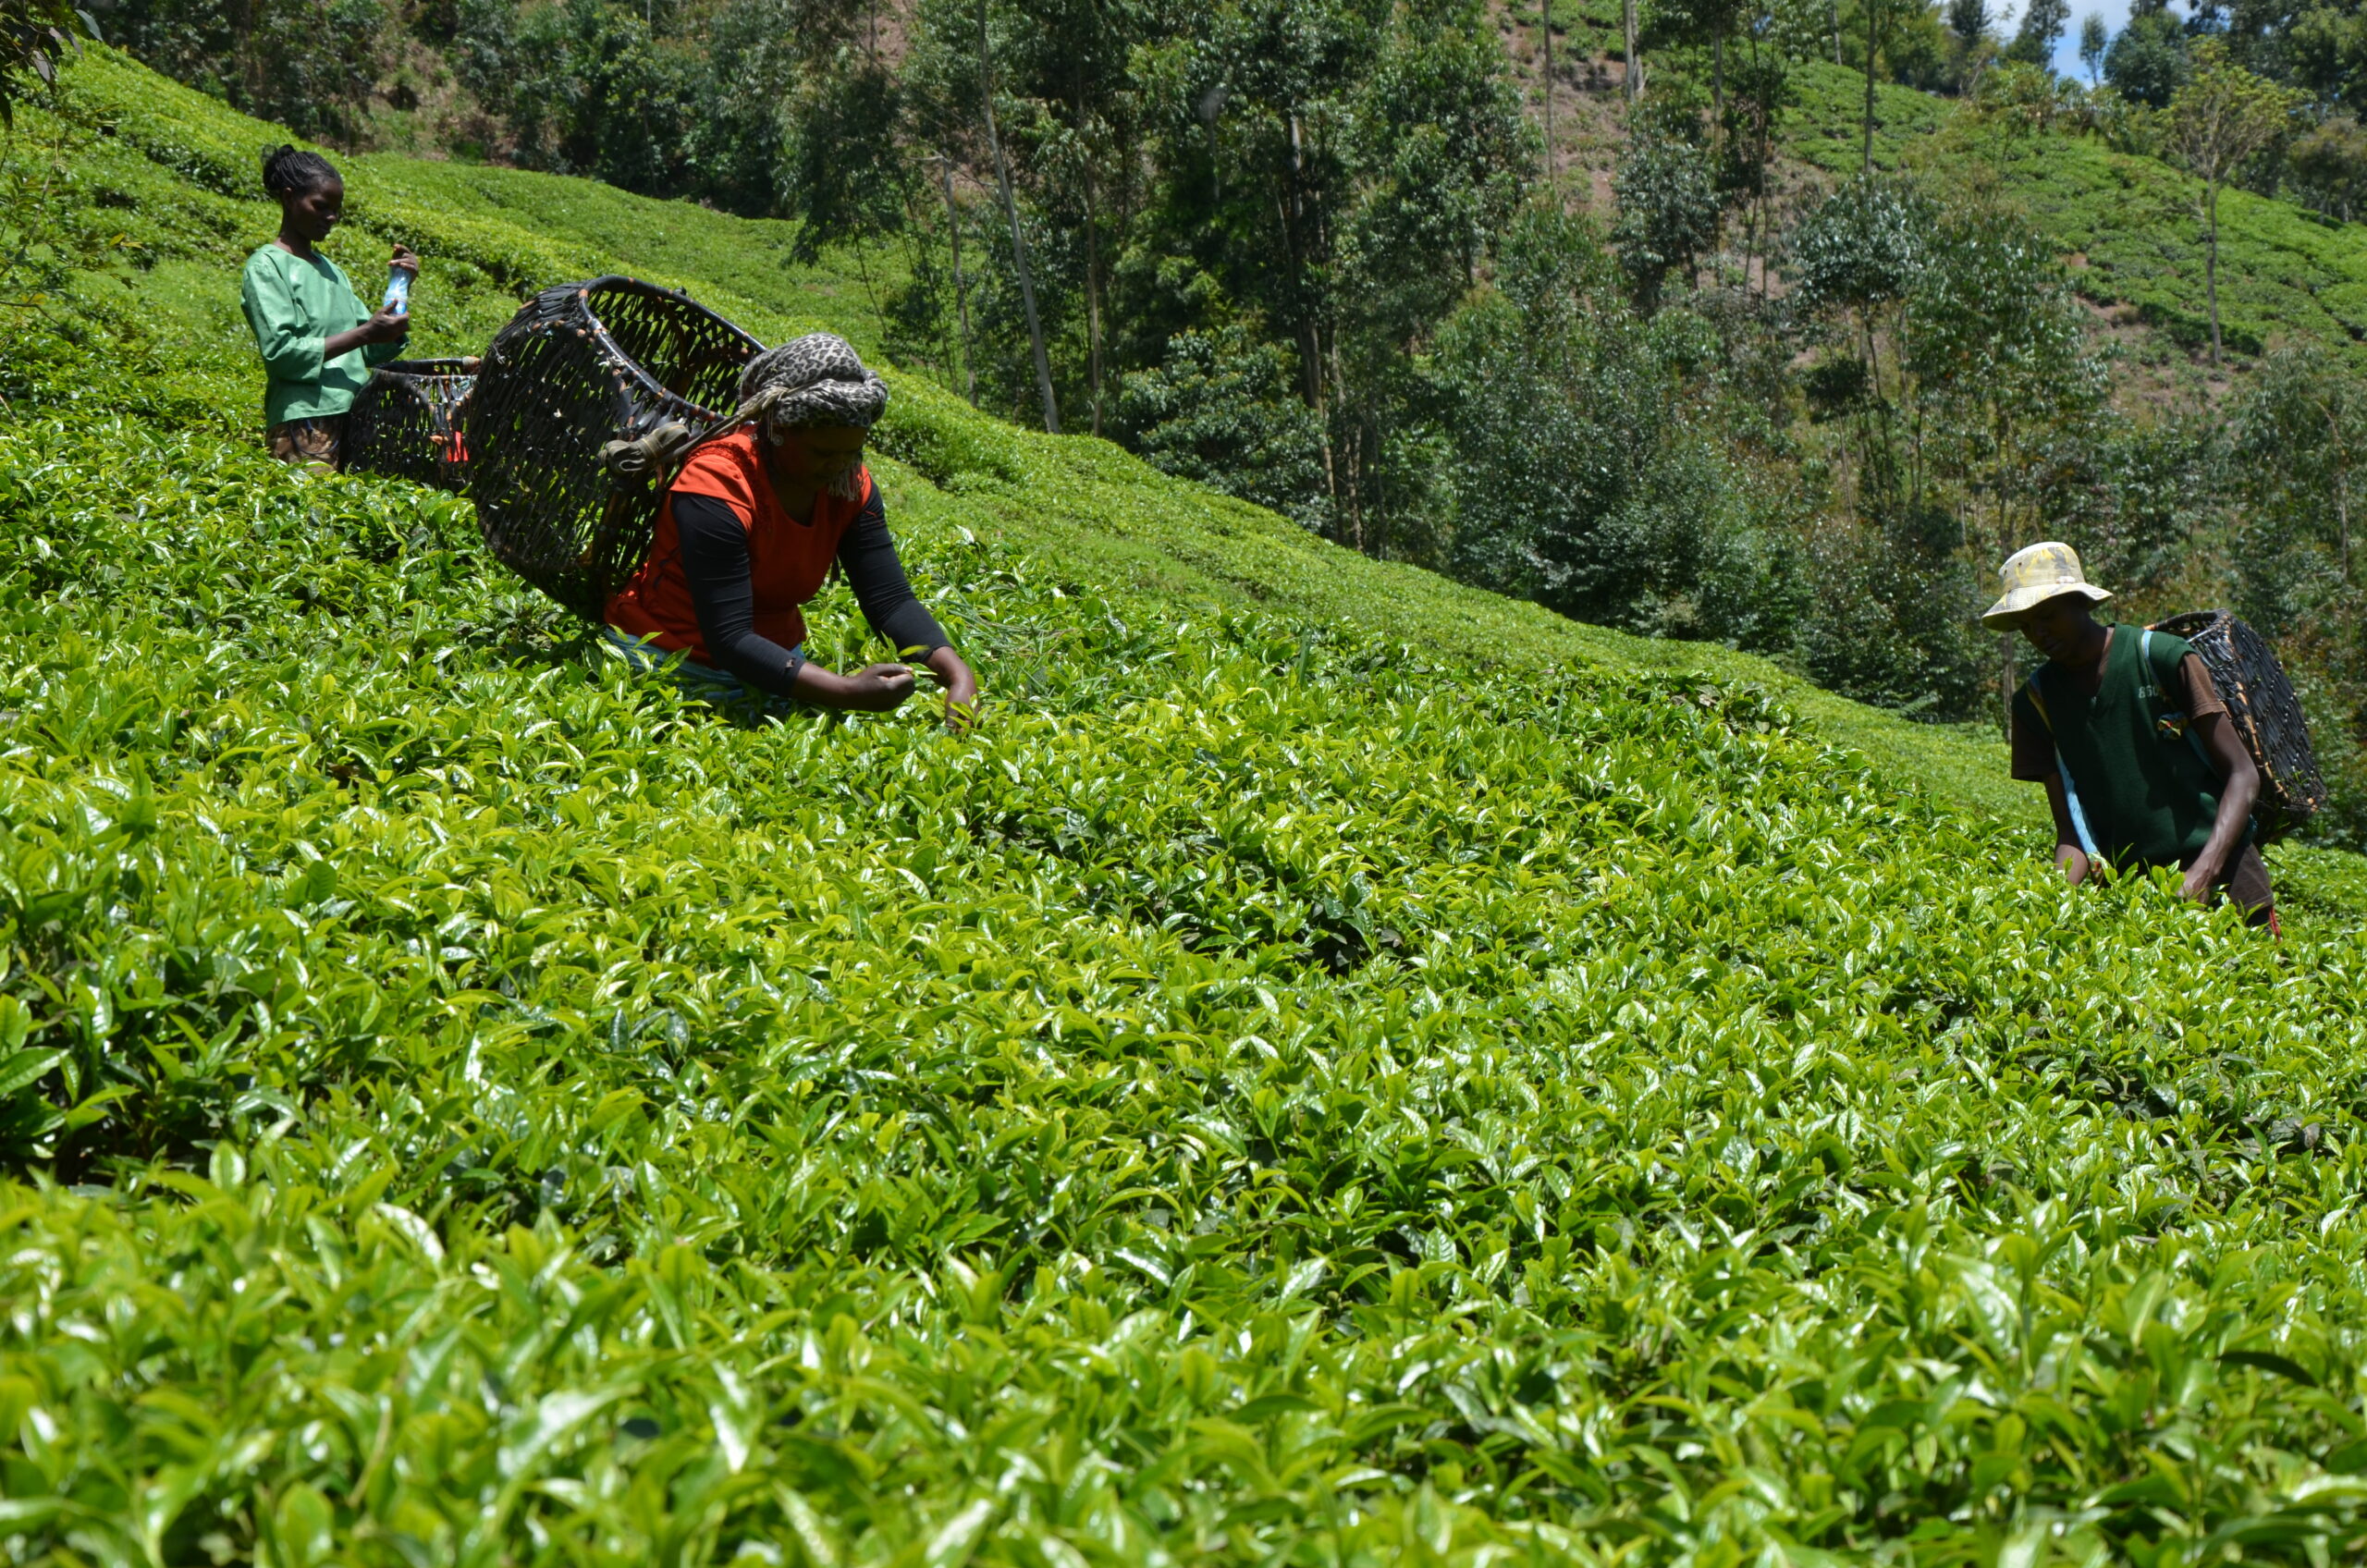 The firm recently launched a mobile app to enhance communication, engagement and account management for its smallholder tea farmers in the country.